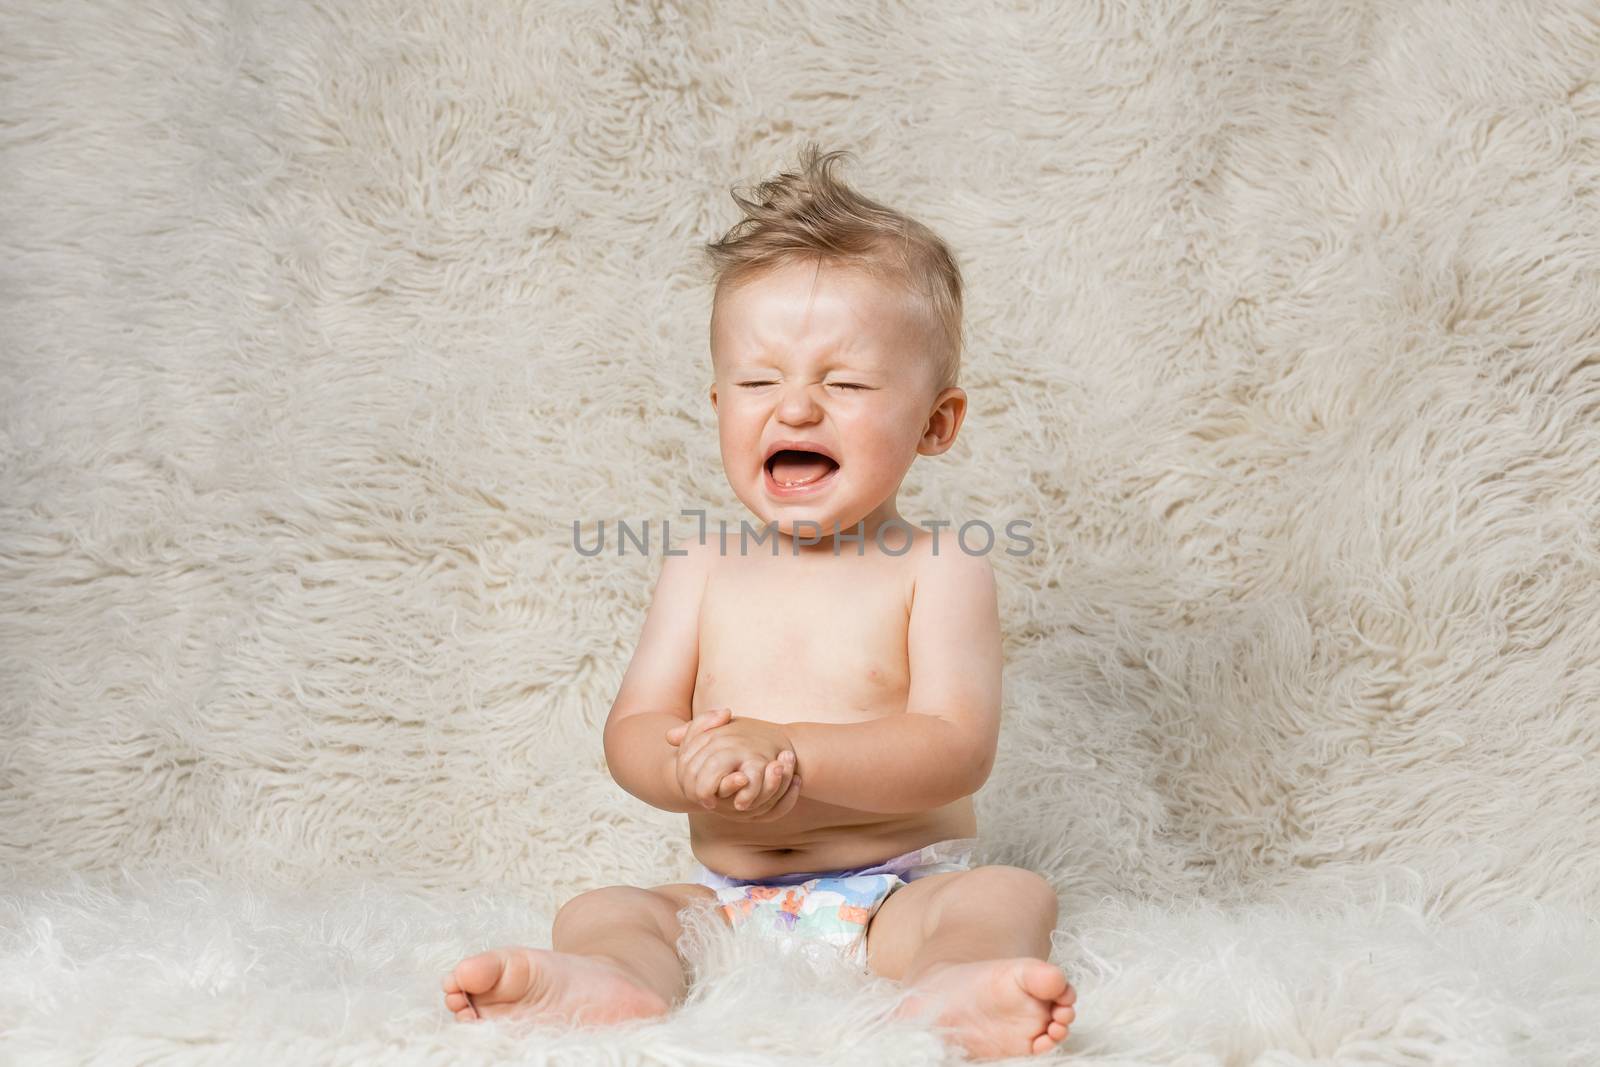 crying baby boy in diapers, sitting on a shaggy woolen homemade blanket